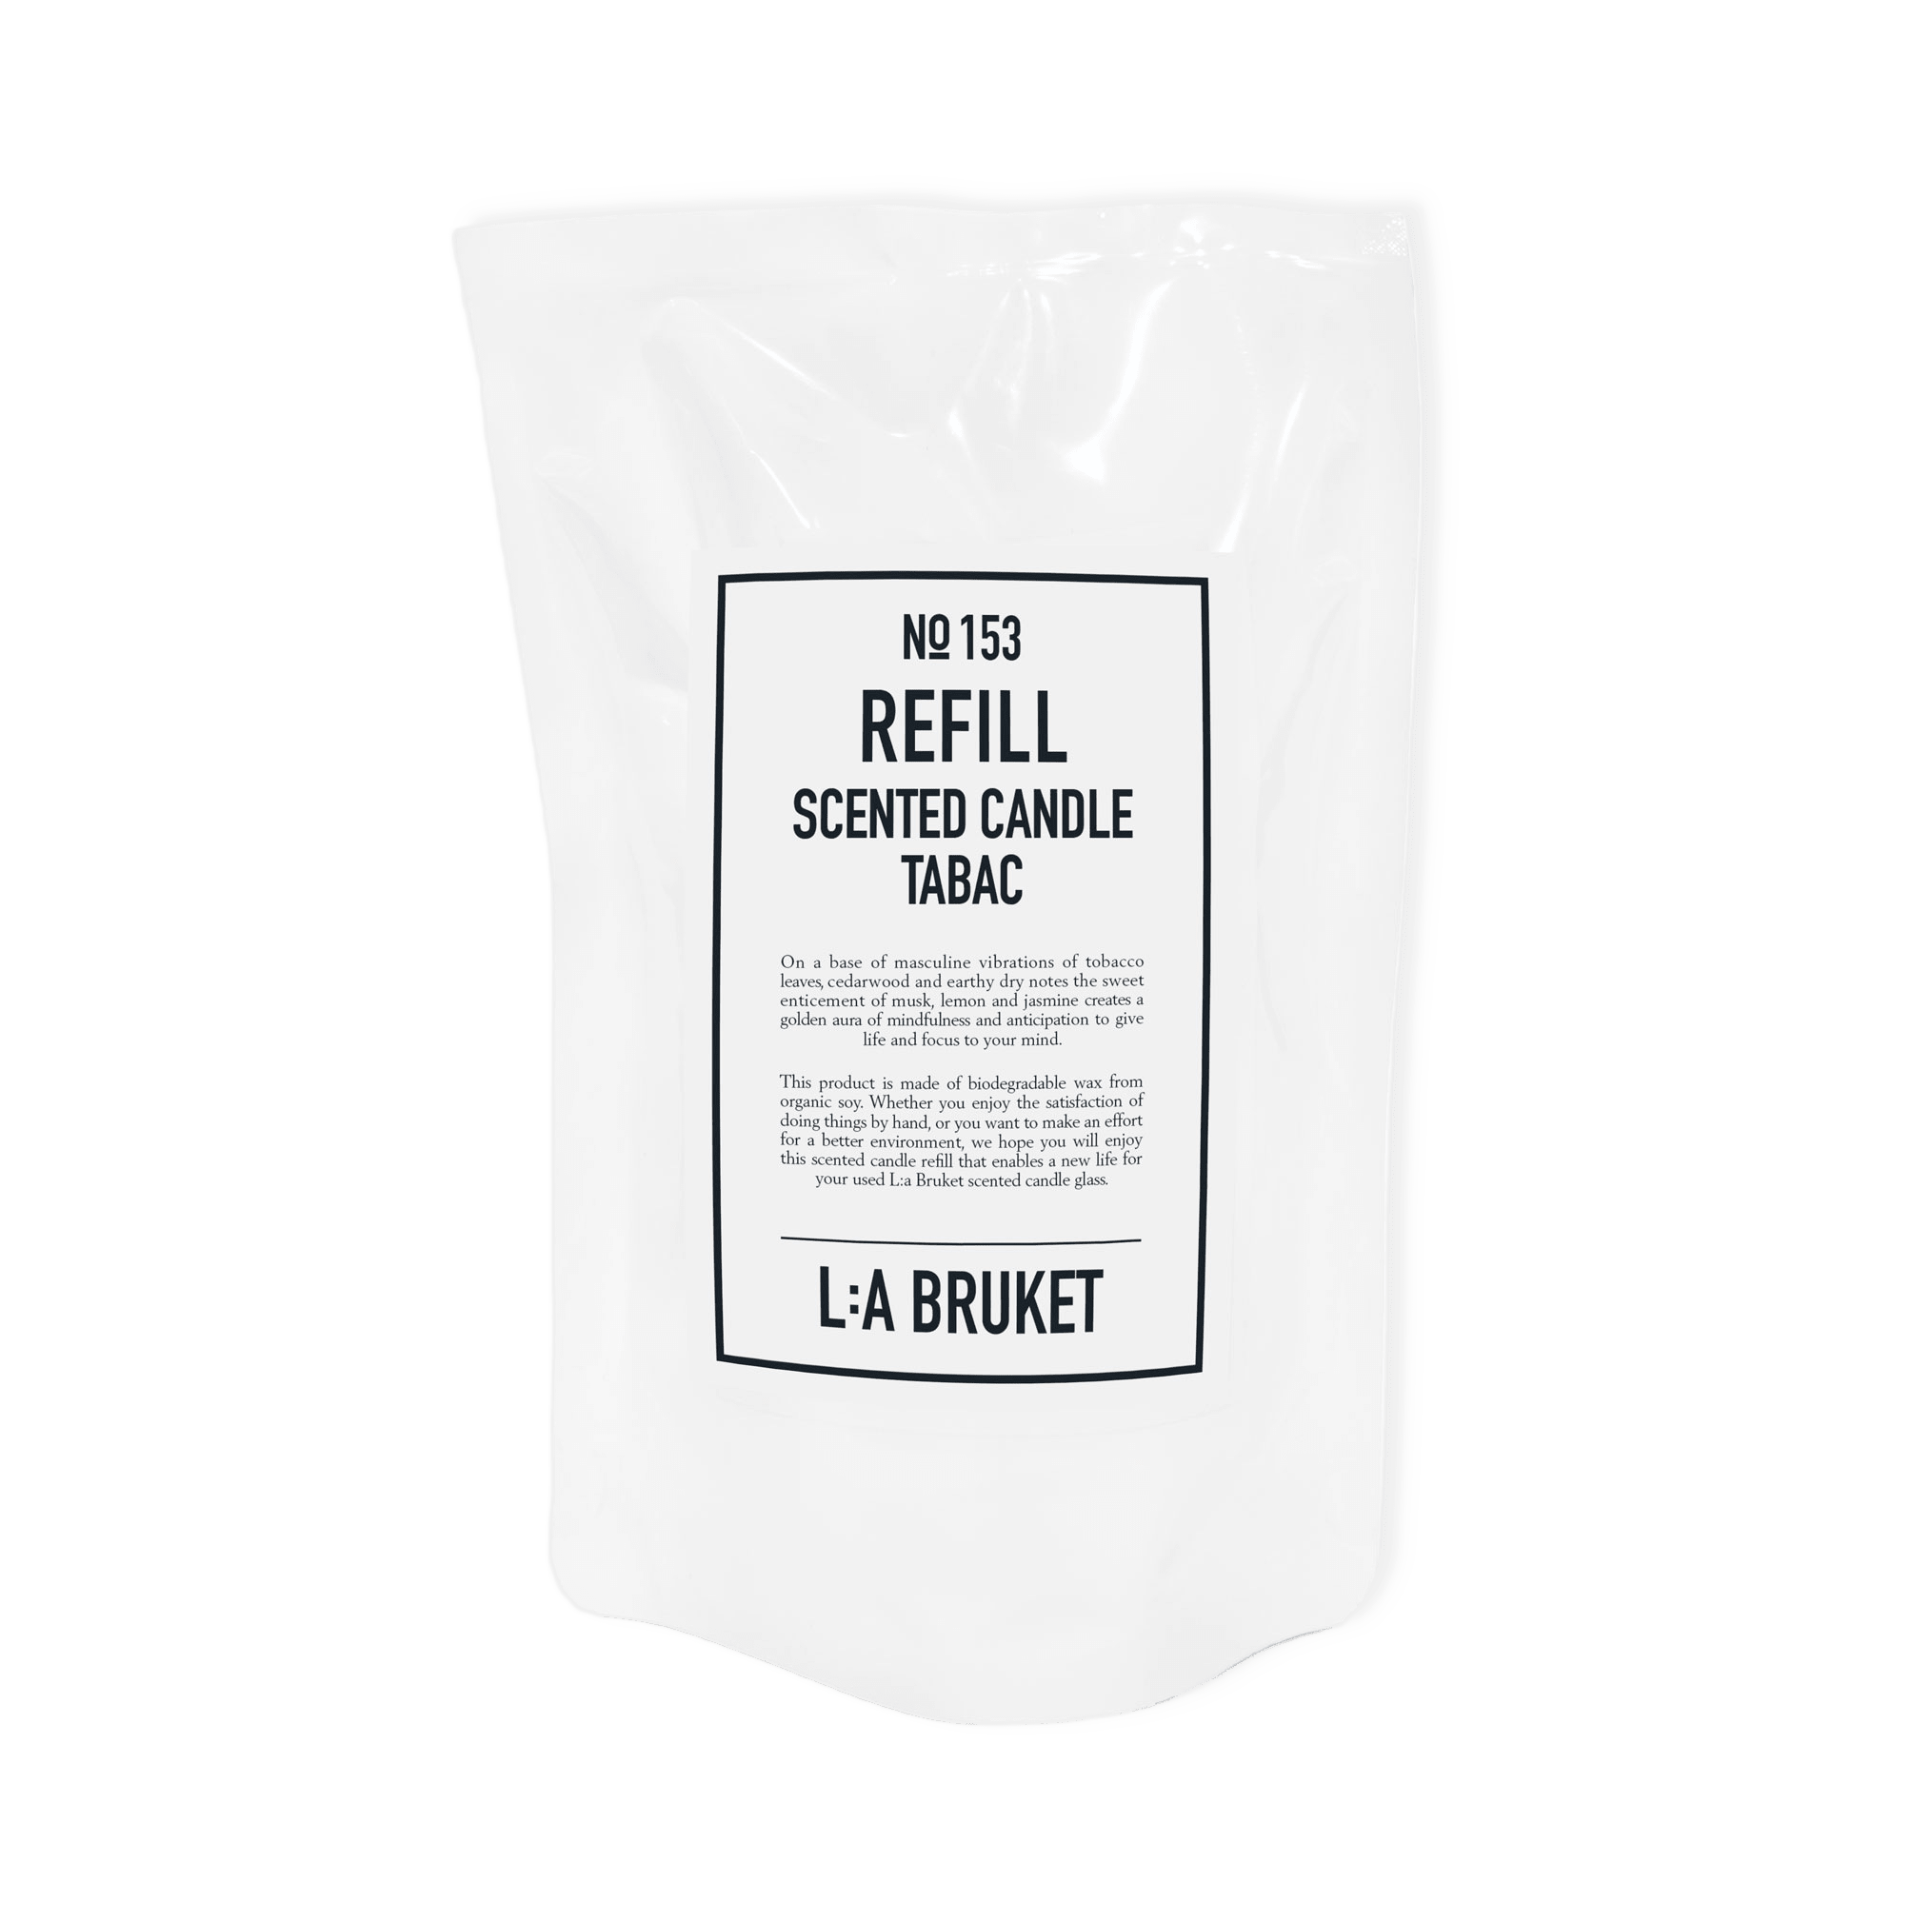 Refill 153 Tabac Scented Candle från L:a Bruket